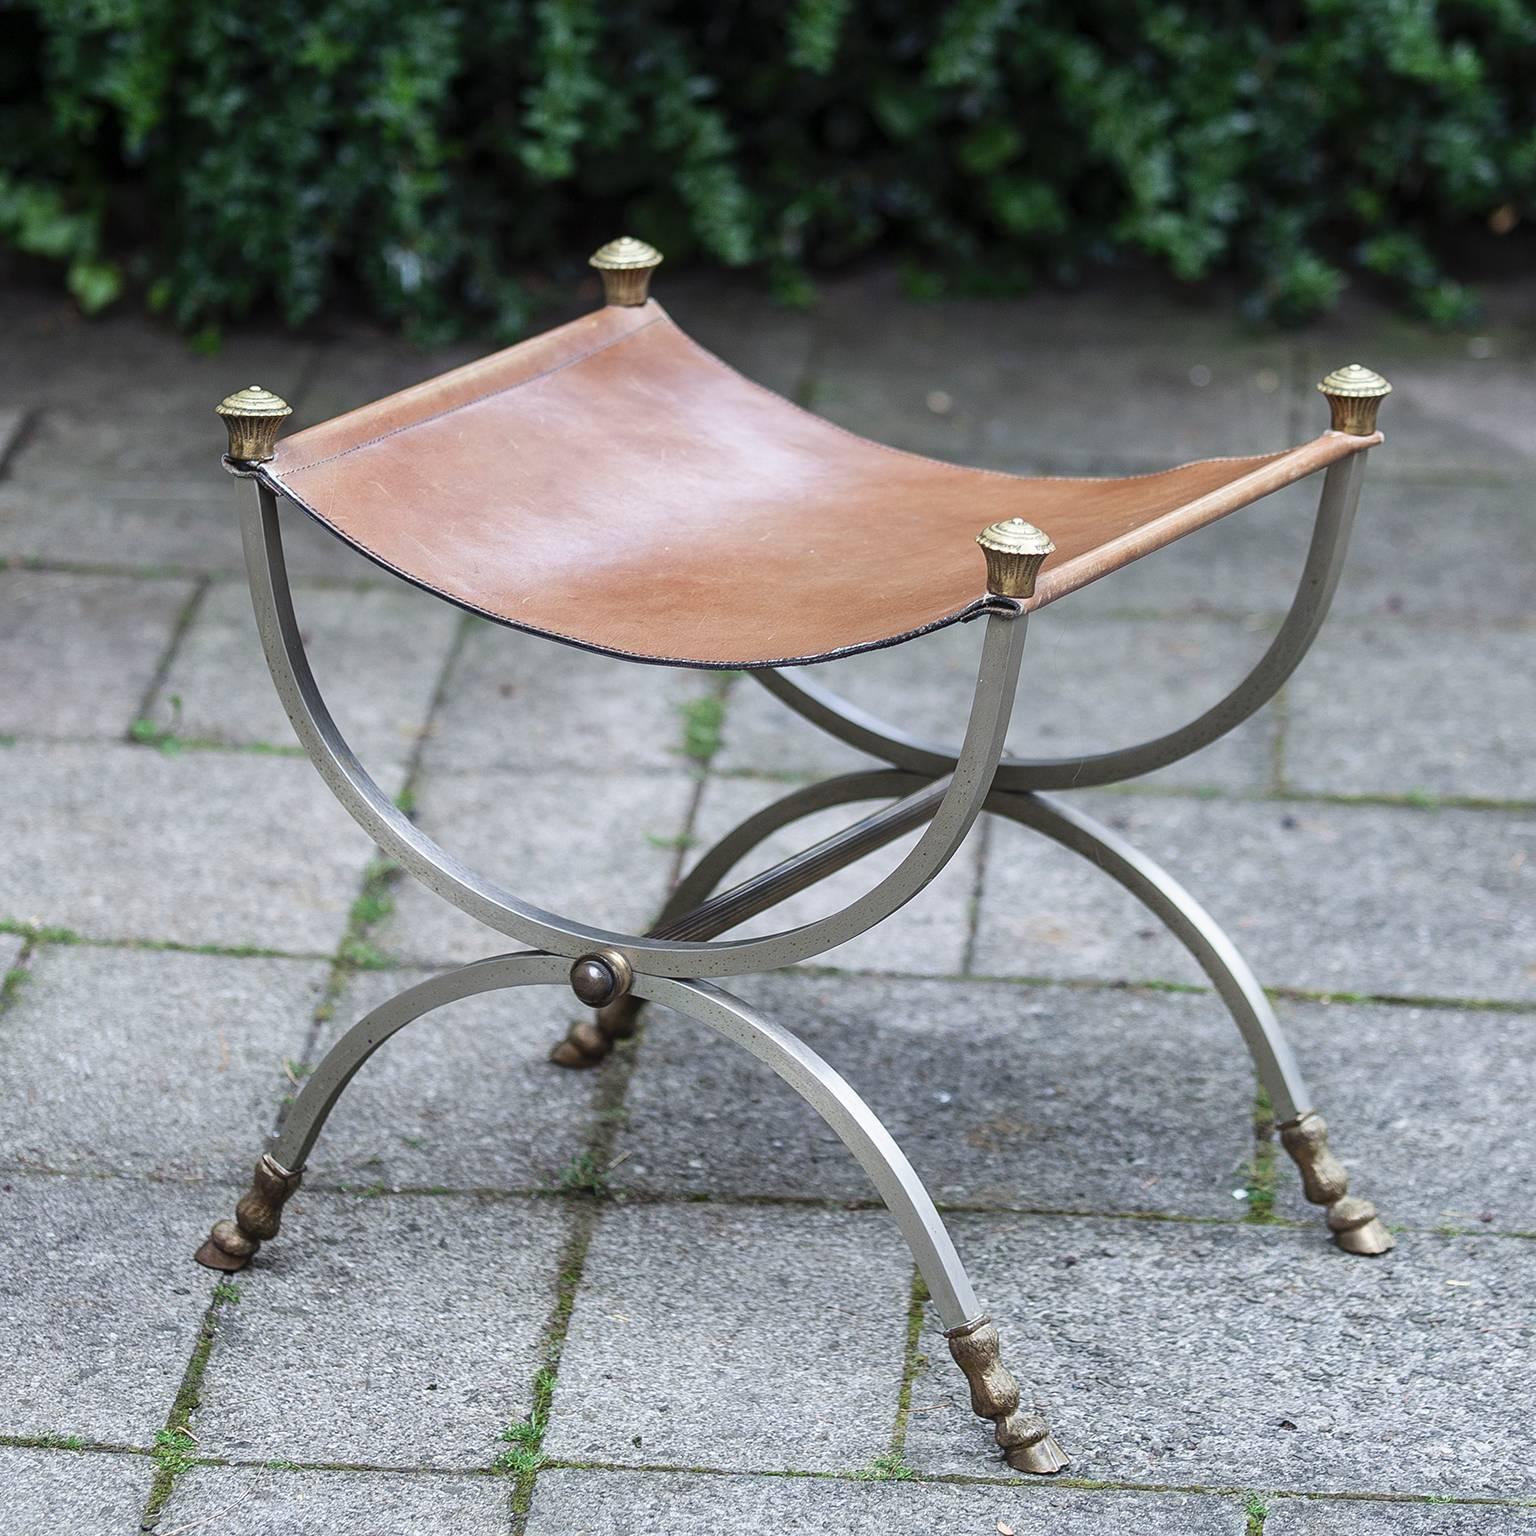 Maison Jansen sling seat stool. Original brown leather seat brushed nickel over steel frames with brass horse feets and finials. Stamped Italy on underside of feet.